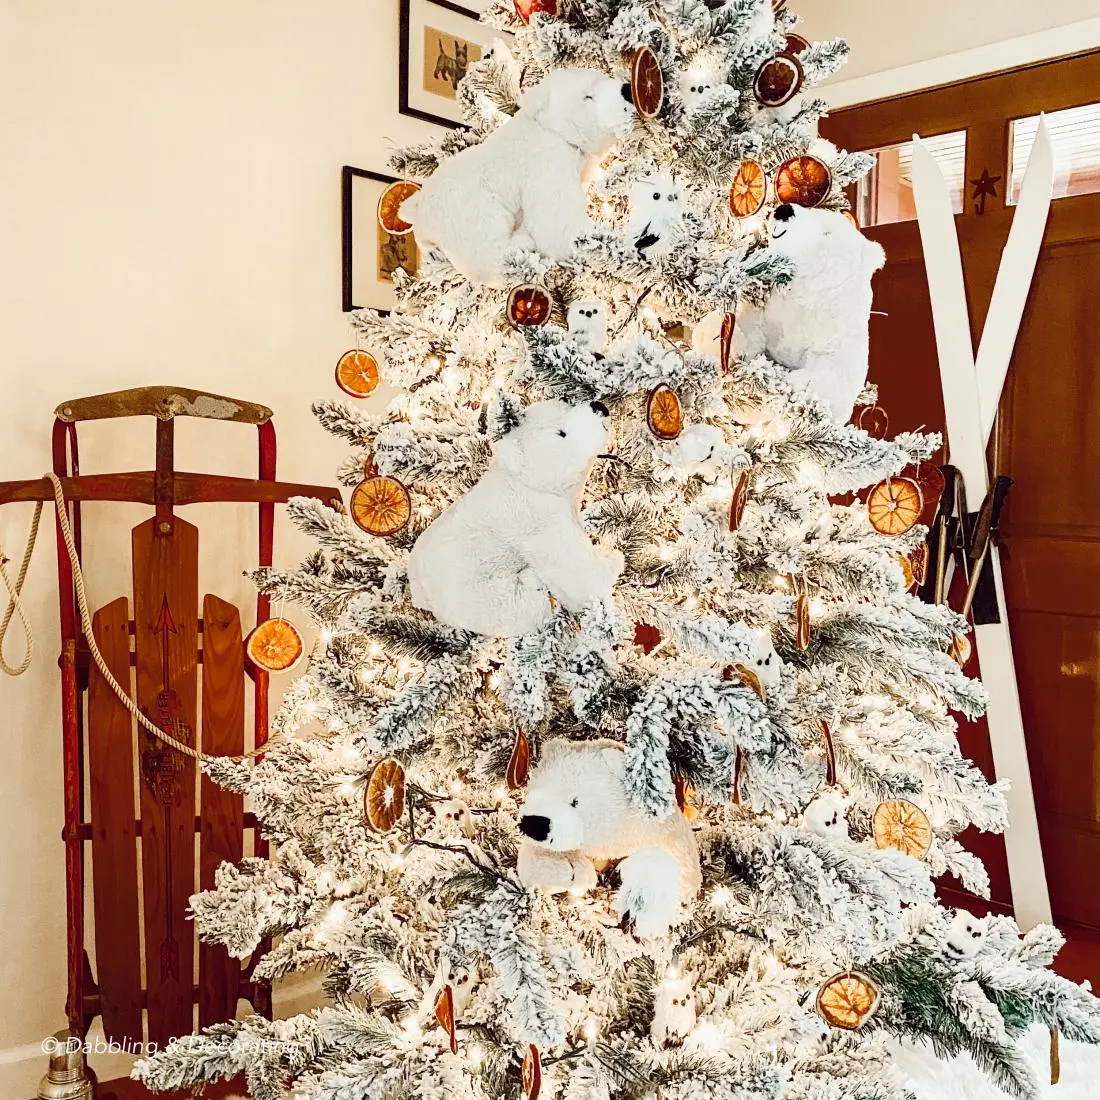 Get tons of inspiring Christmas tree decor ideas. From traditional, to modern, farmhouse, organic, colorful, and more, you are guaranteed to find a tree perfect for your homes decor and design! 